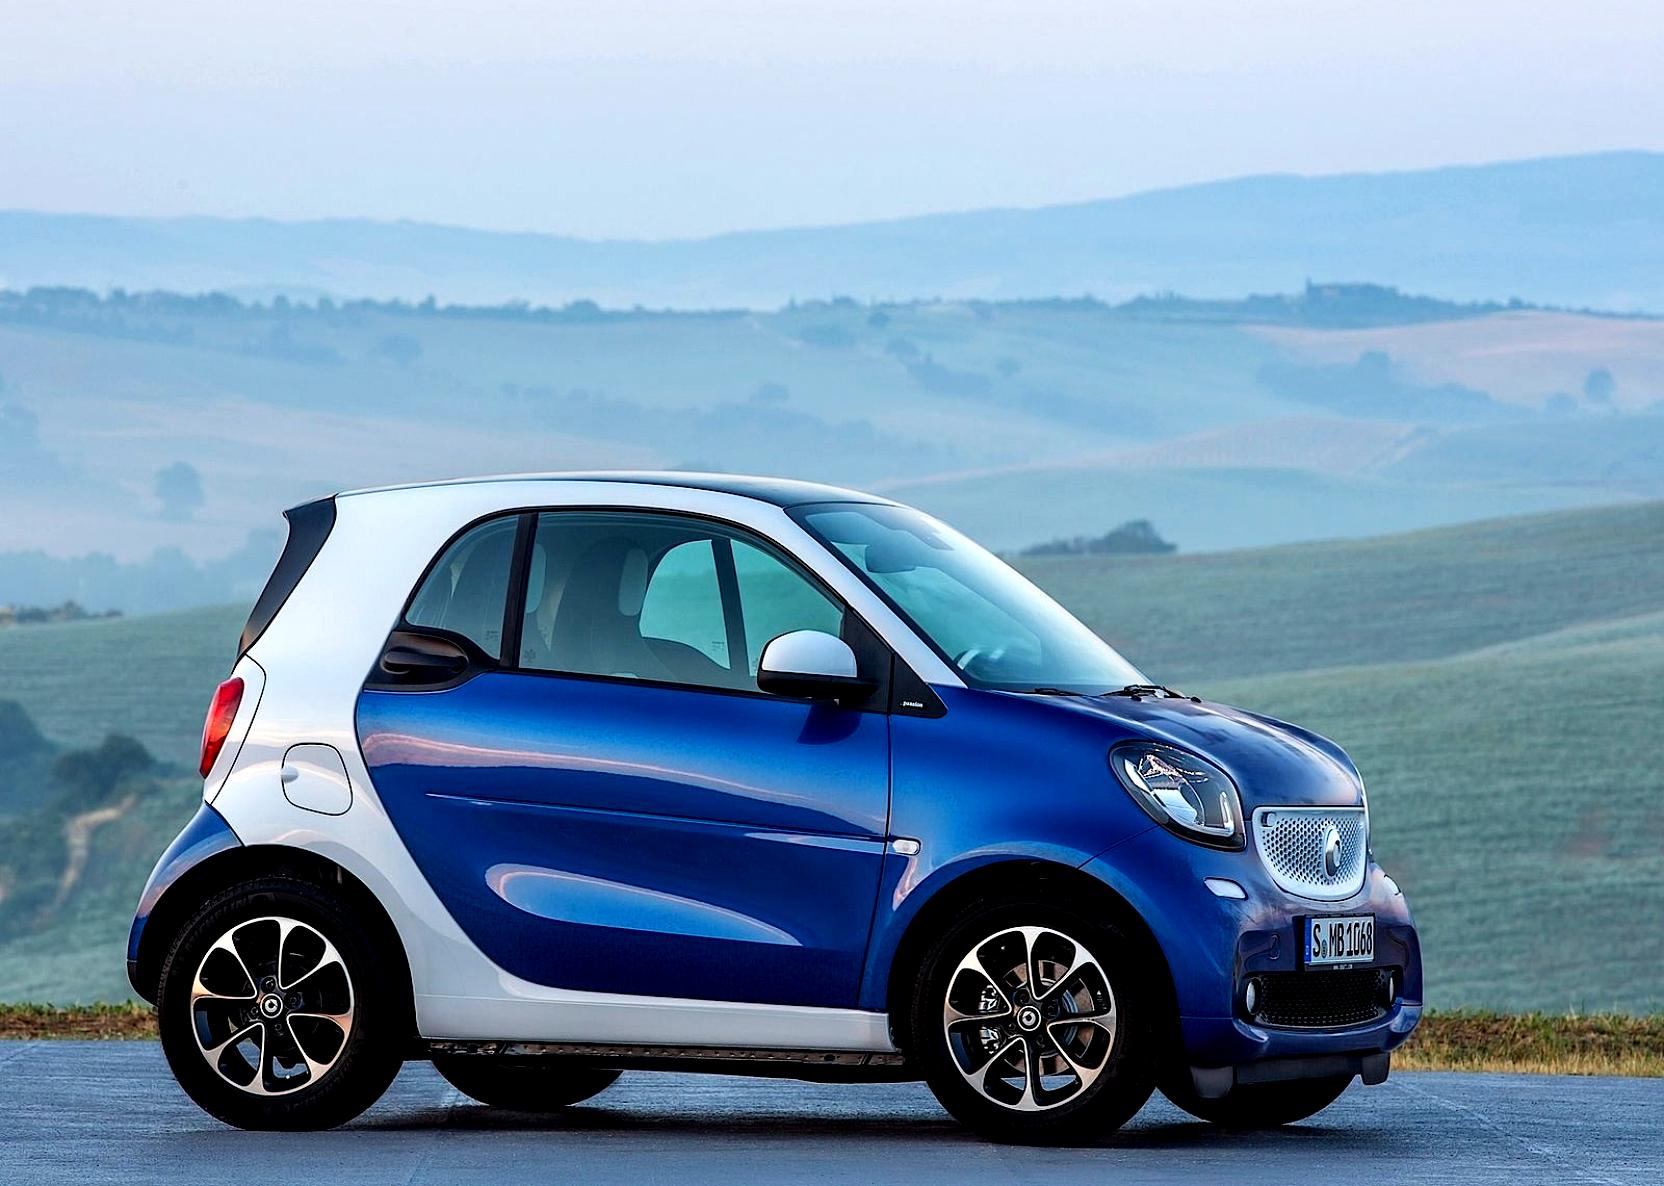 Smart Fortwo 2014 #31